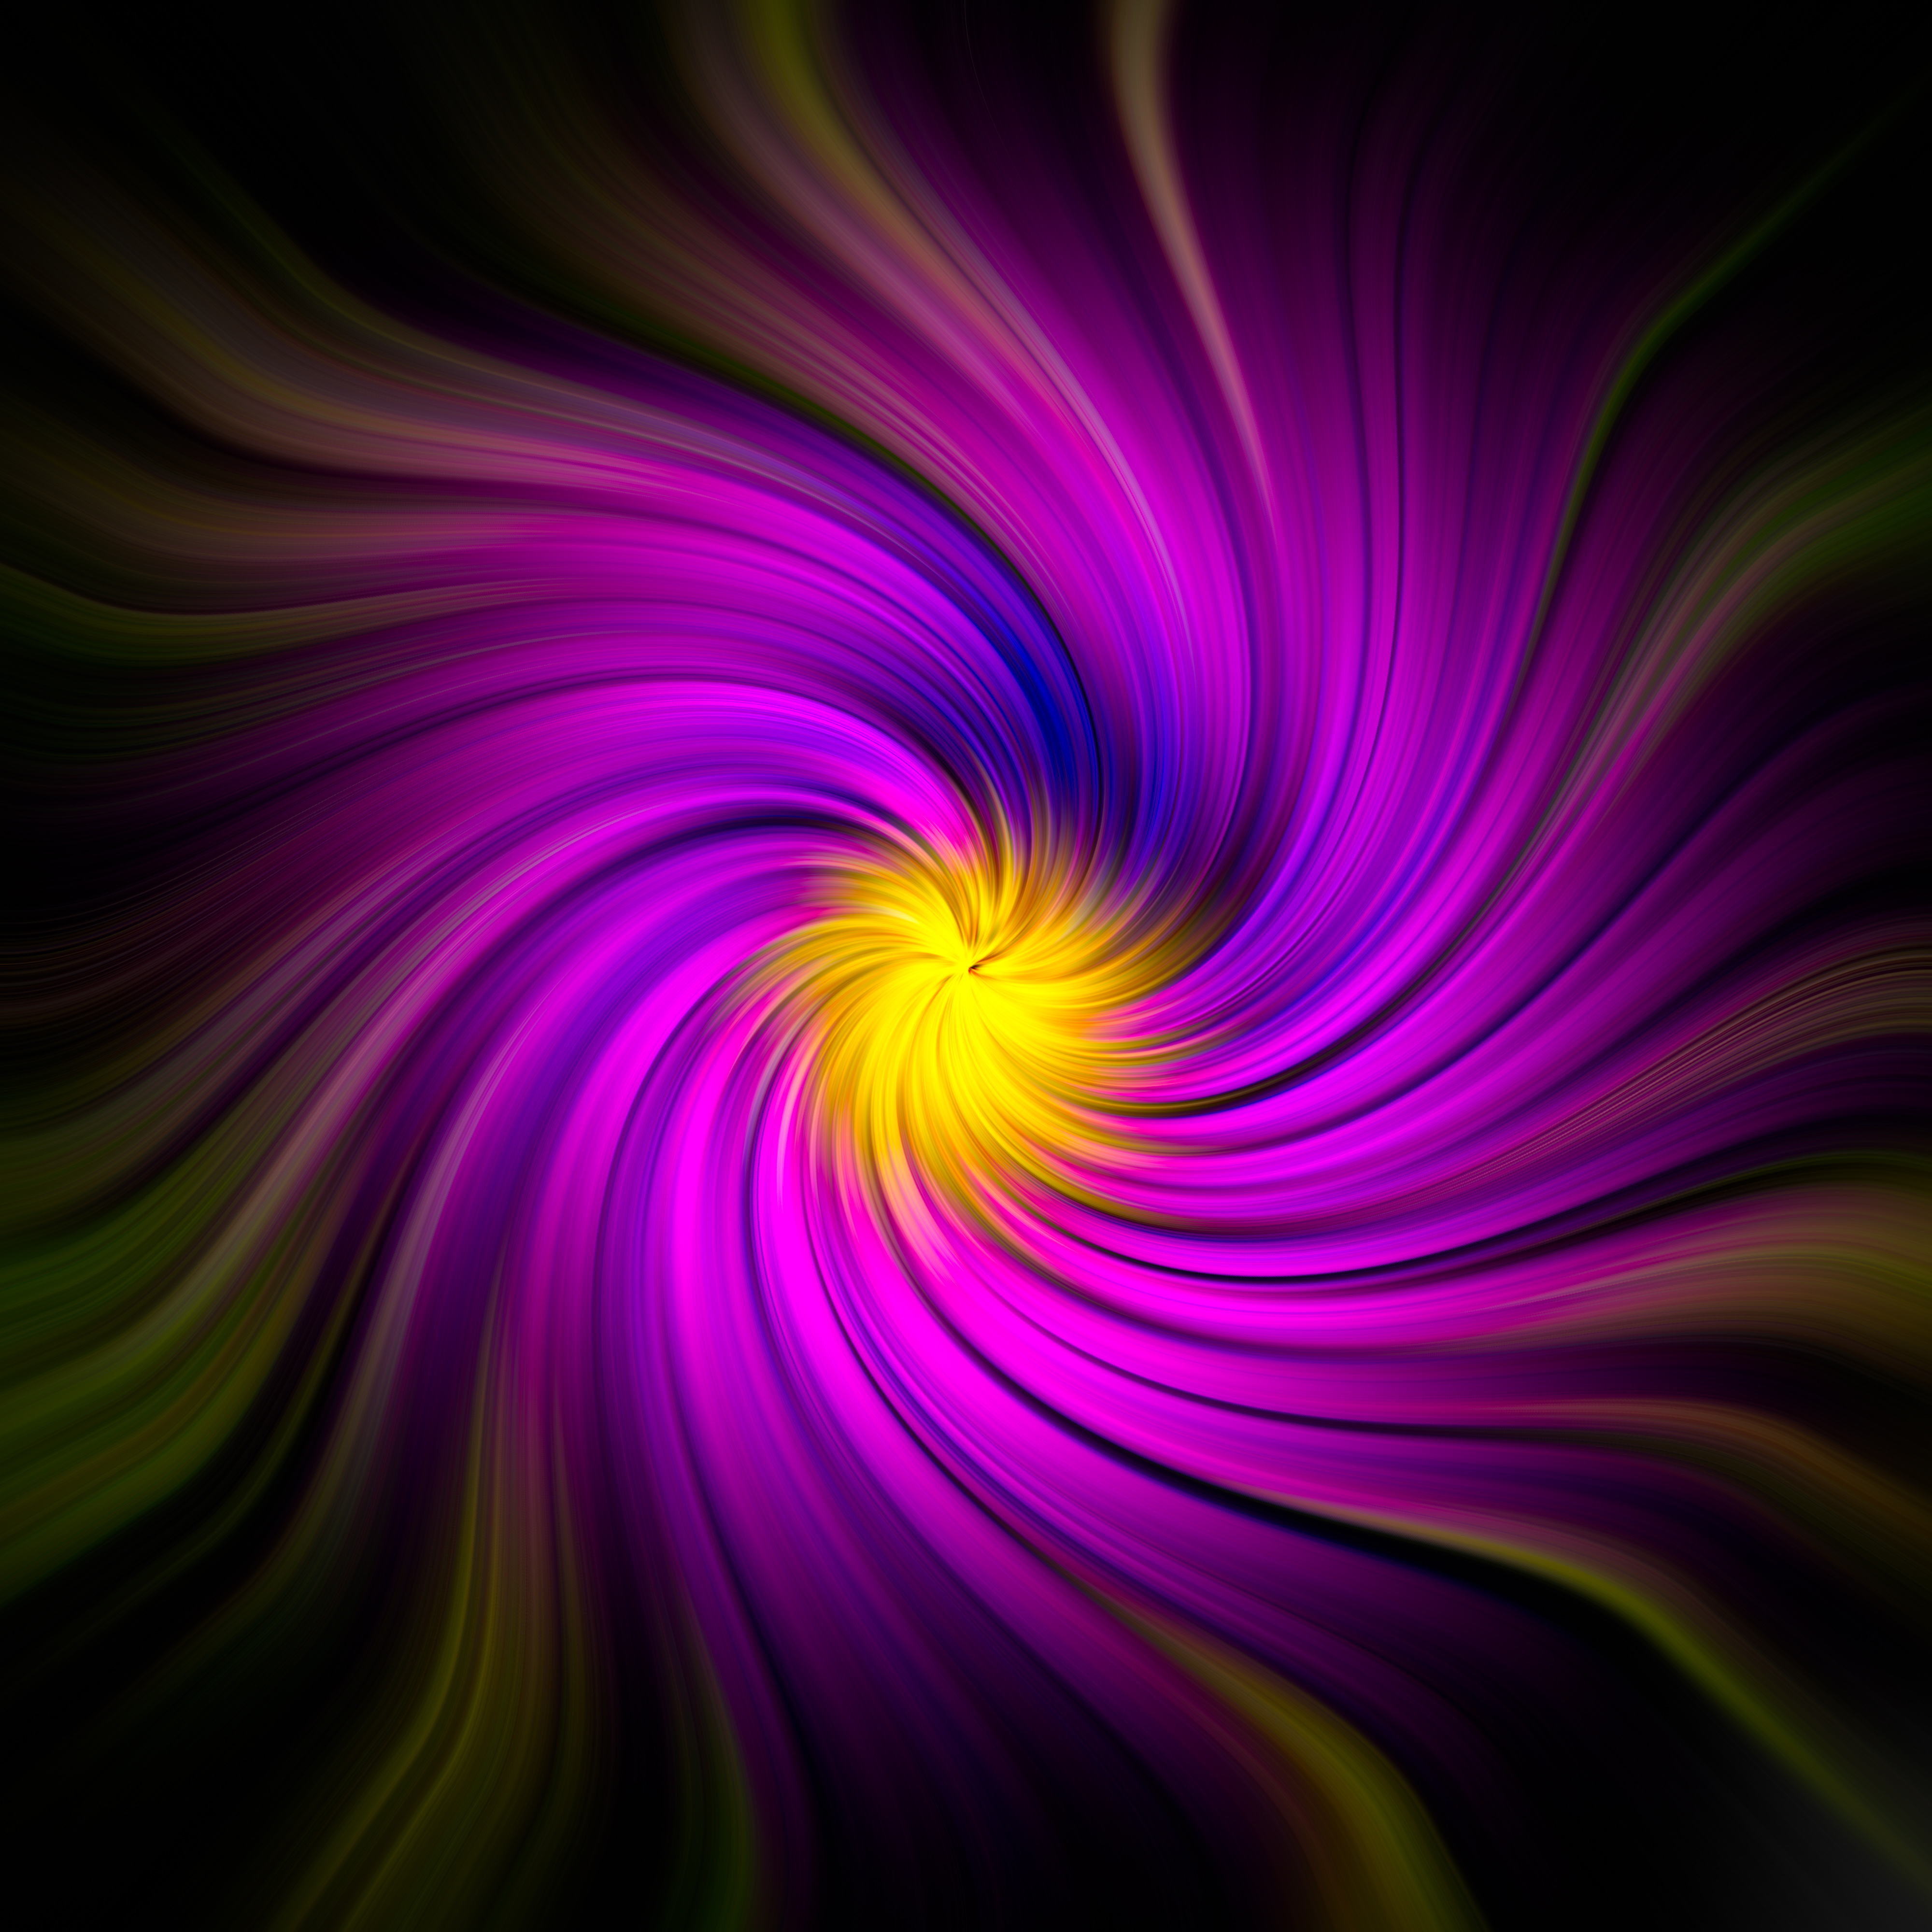 rotation, abstract, violet, fractal, purple, swirling, involute